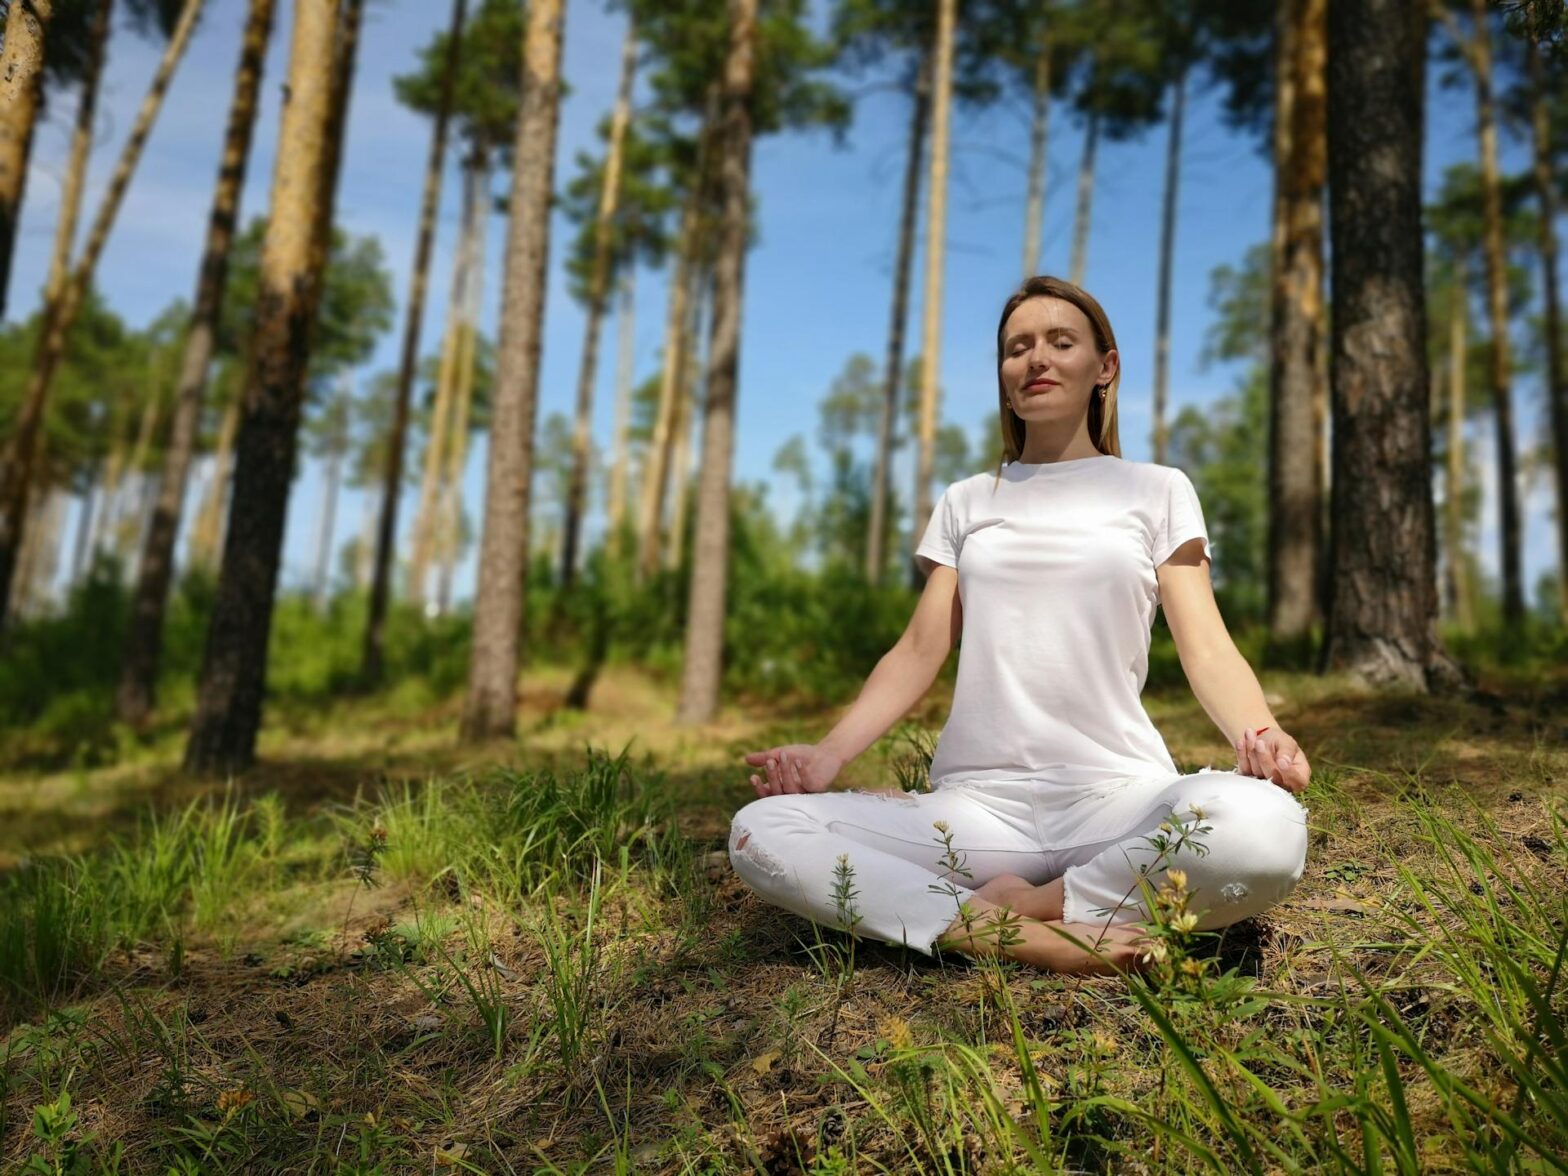 Person meditating outdoors, practicing self-care in nature